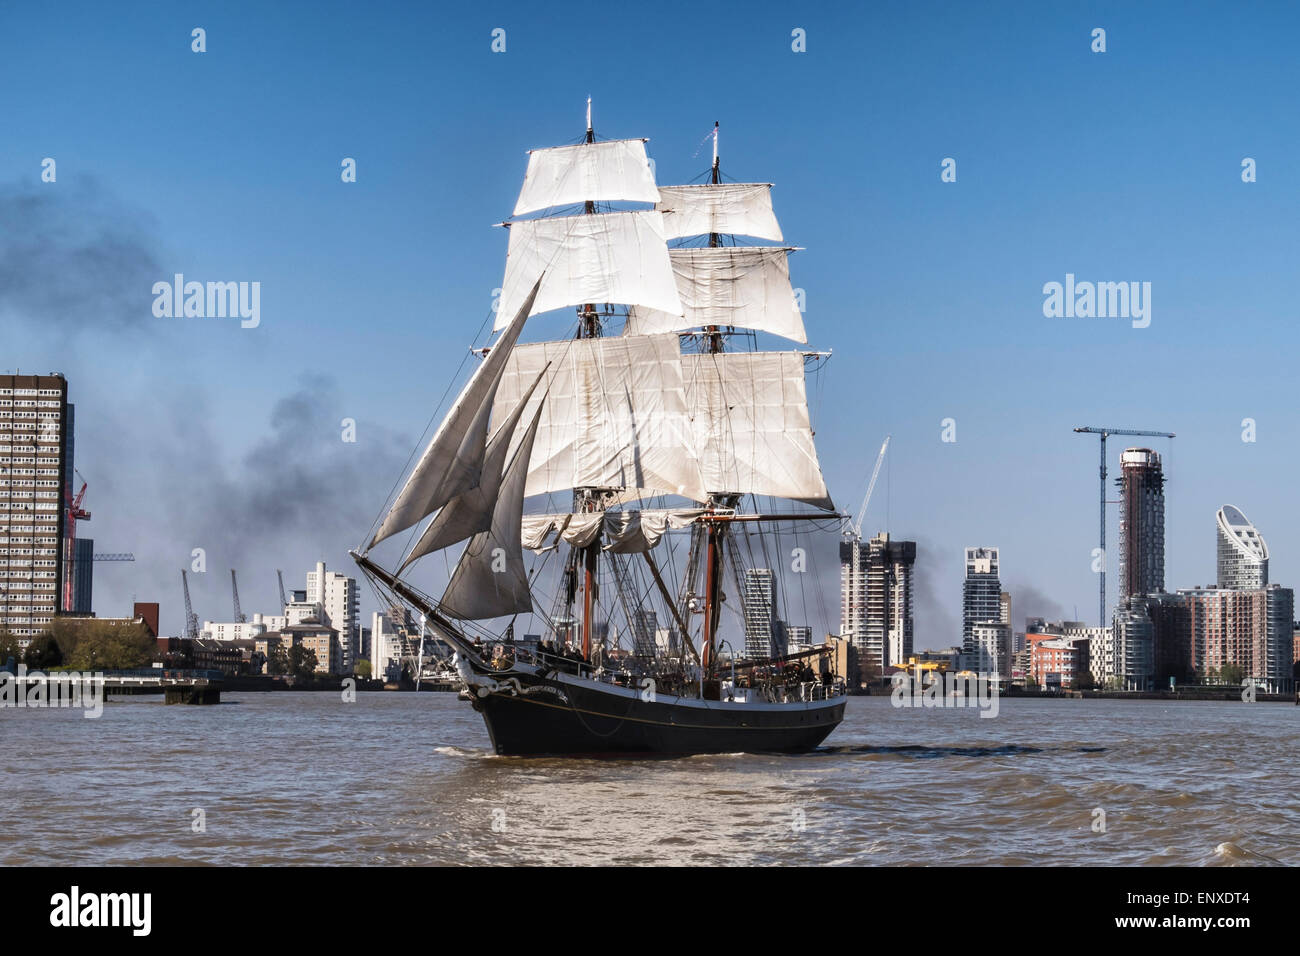 Tall sailing ship, Morgenster, sails up the river Thames, London Stock Photo